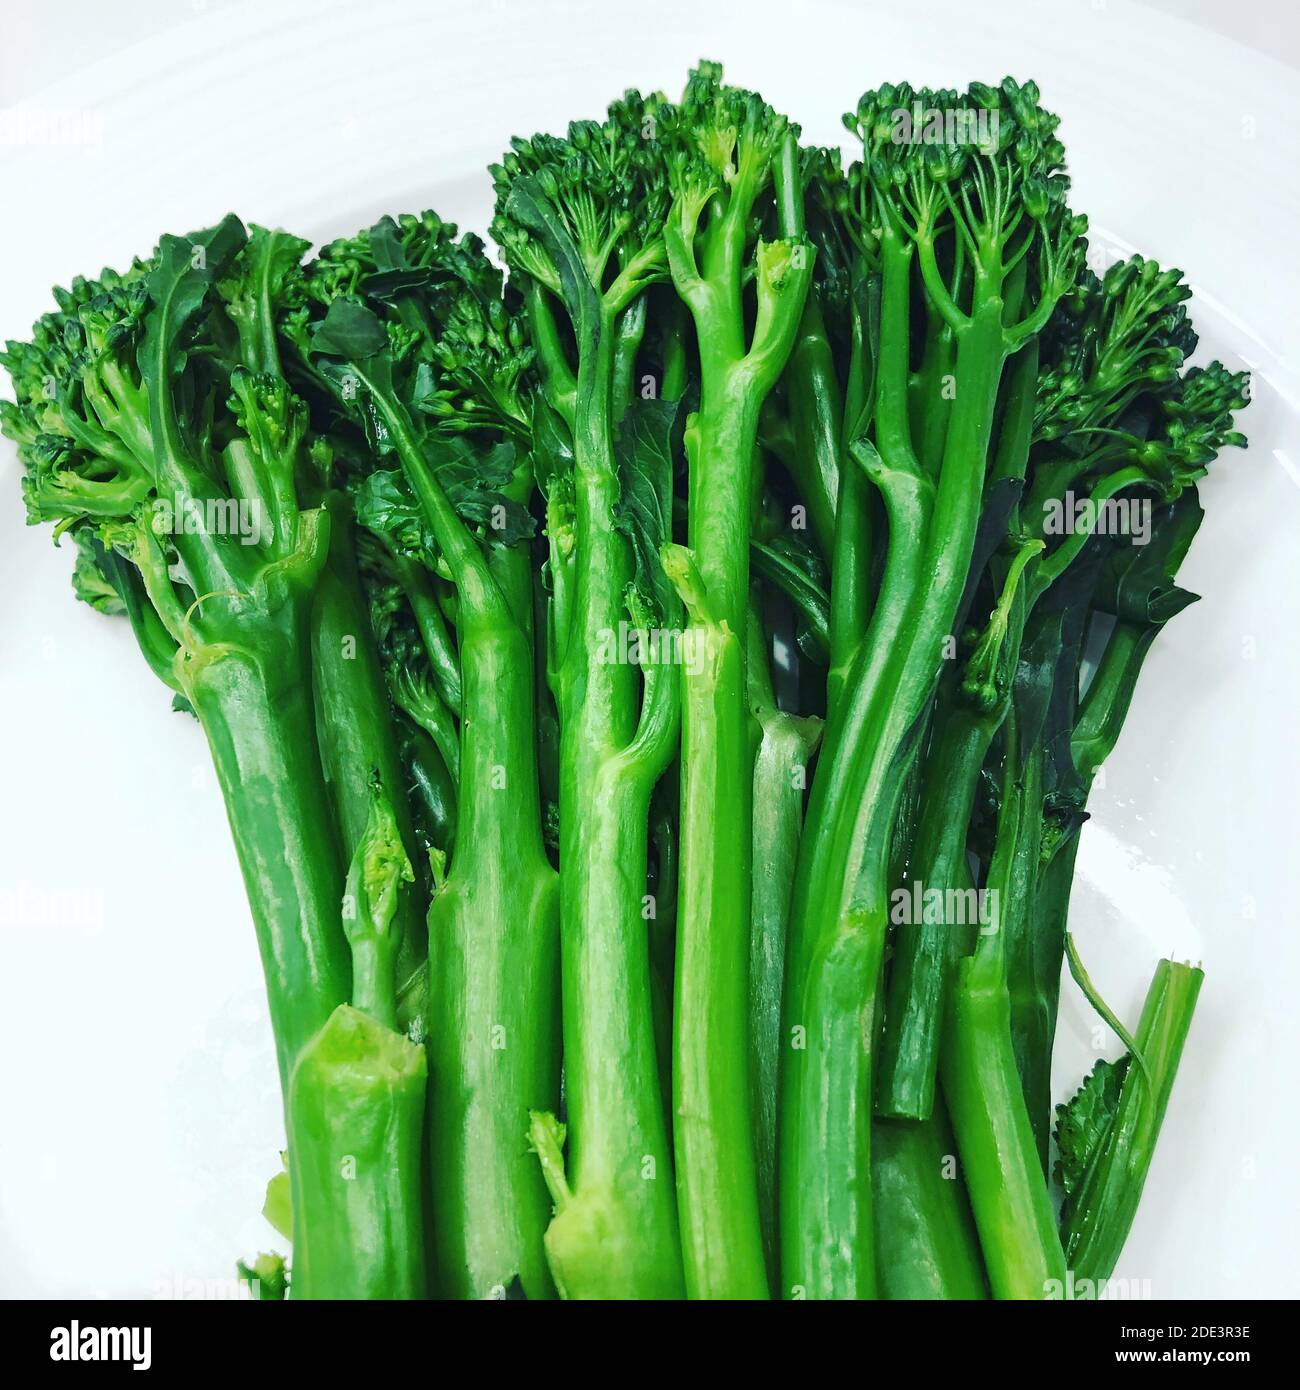 Steamed Broccolini on White Plate Stock Photo